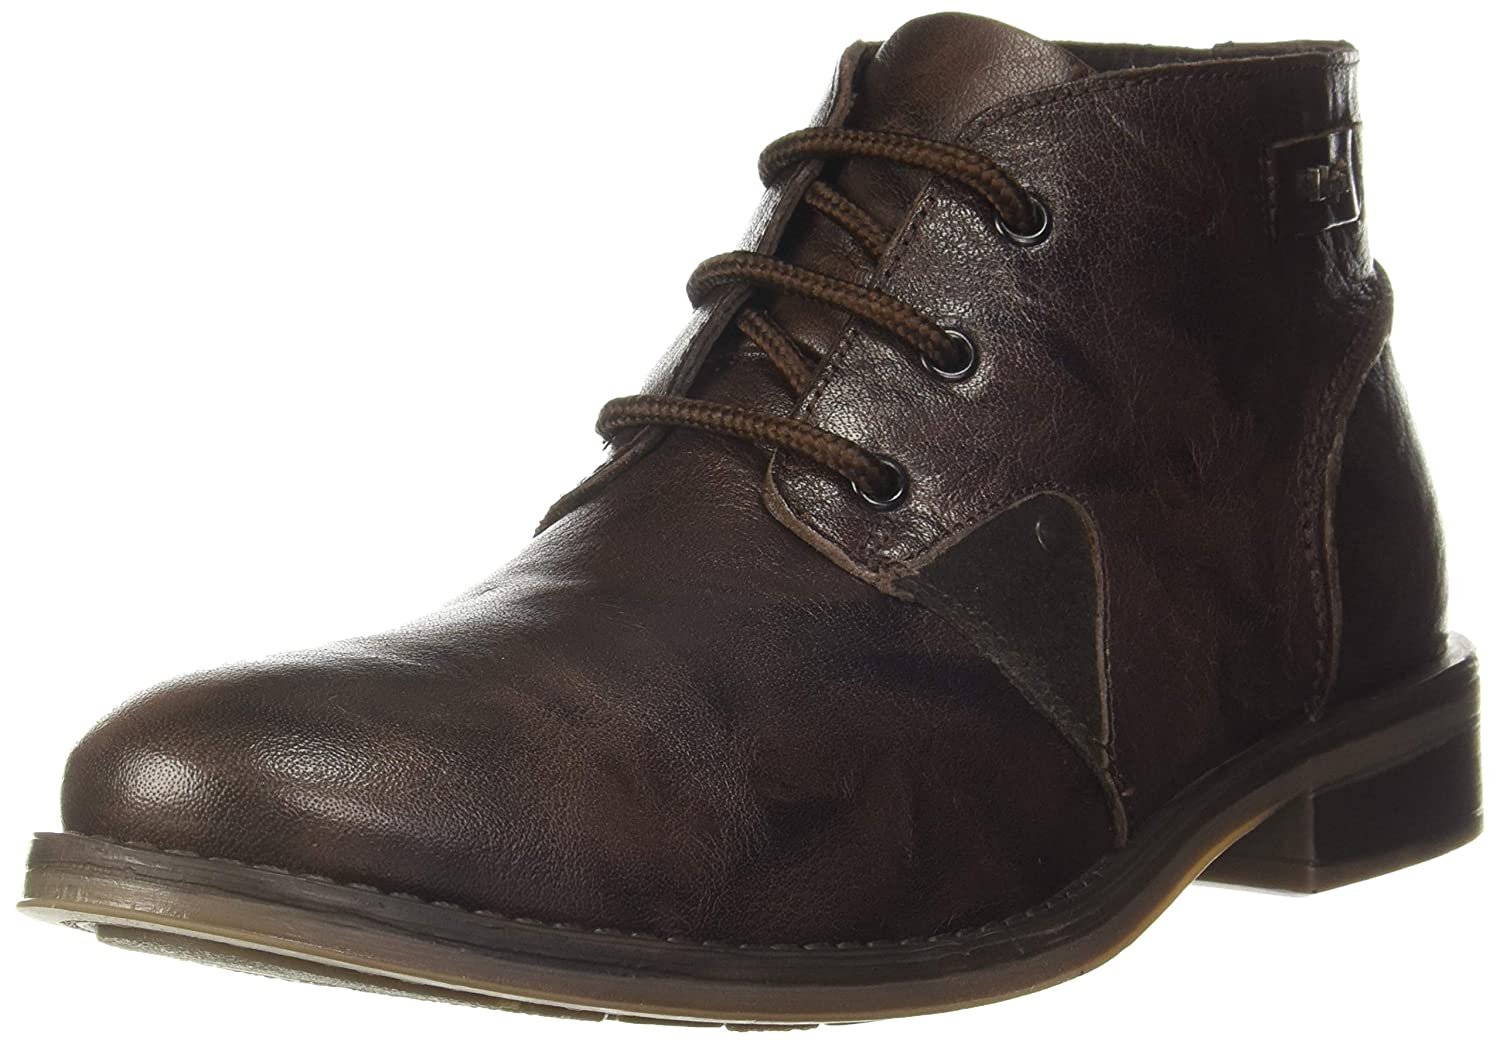 top grain leather boots